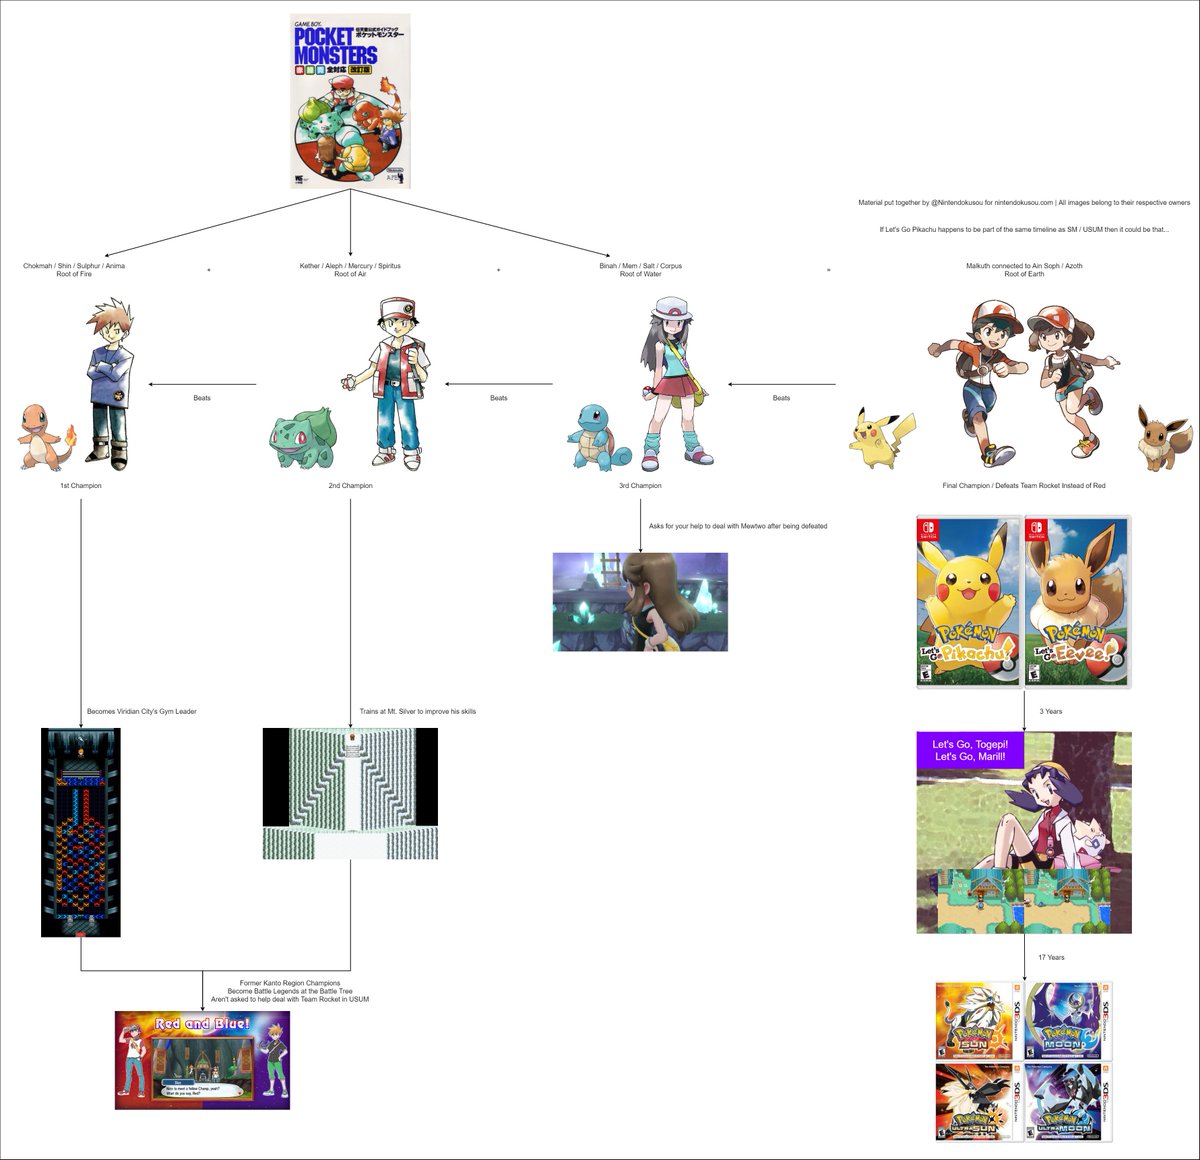 Eduardo Here You Go Put Together A Small Diagram To Explain Why The Let S Go Games Could Actually Be Part Of The 3rd Branch Timeline A K A Mega Evolution Timeline Instead